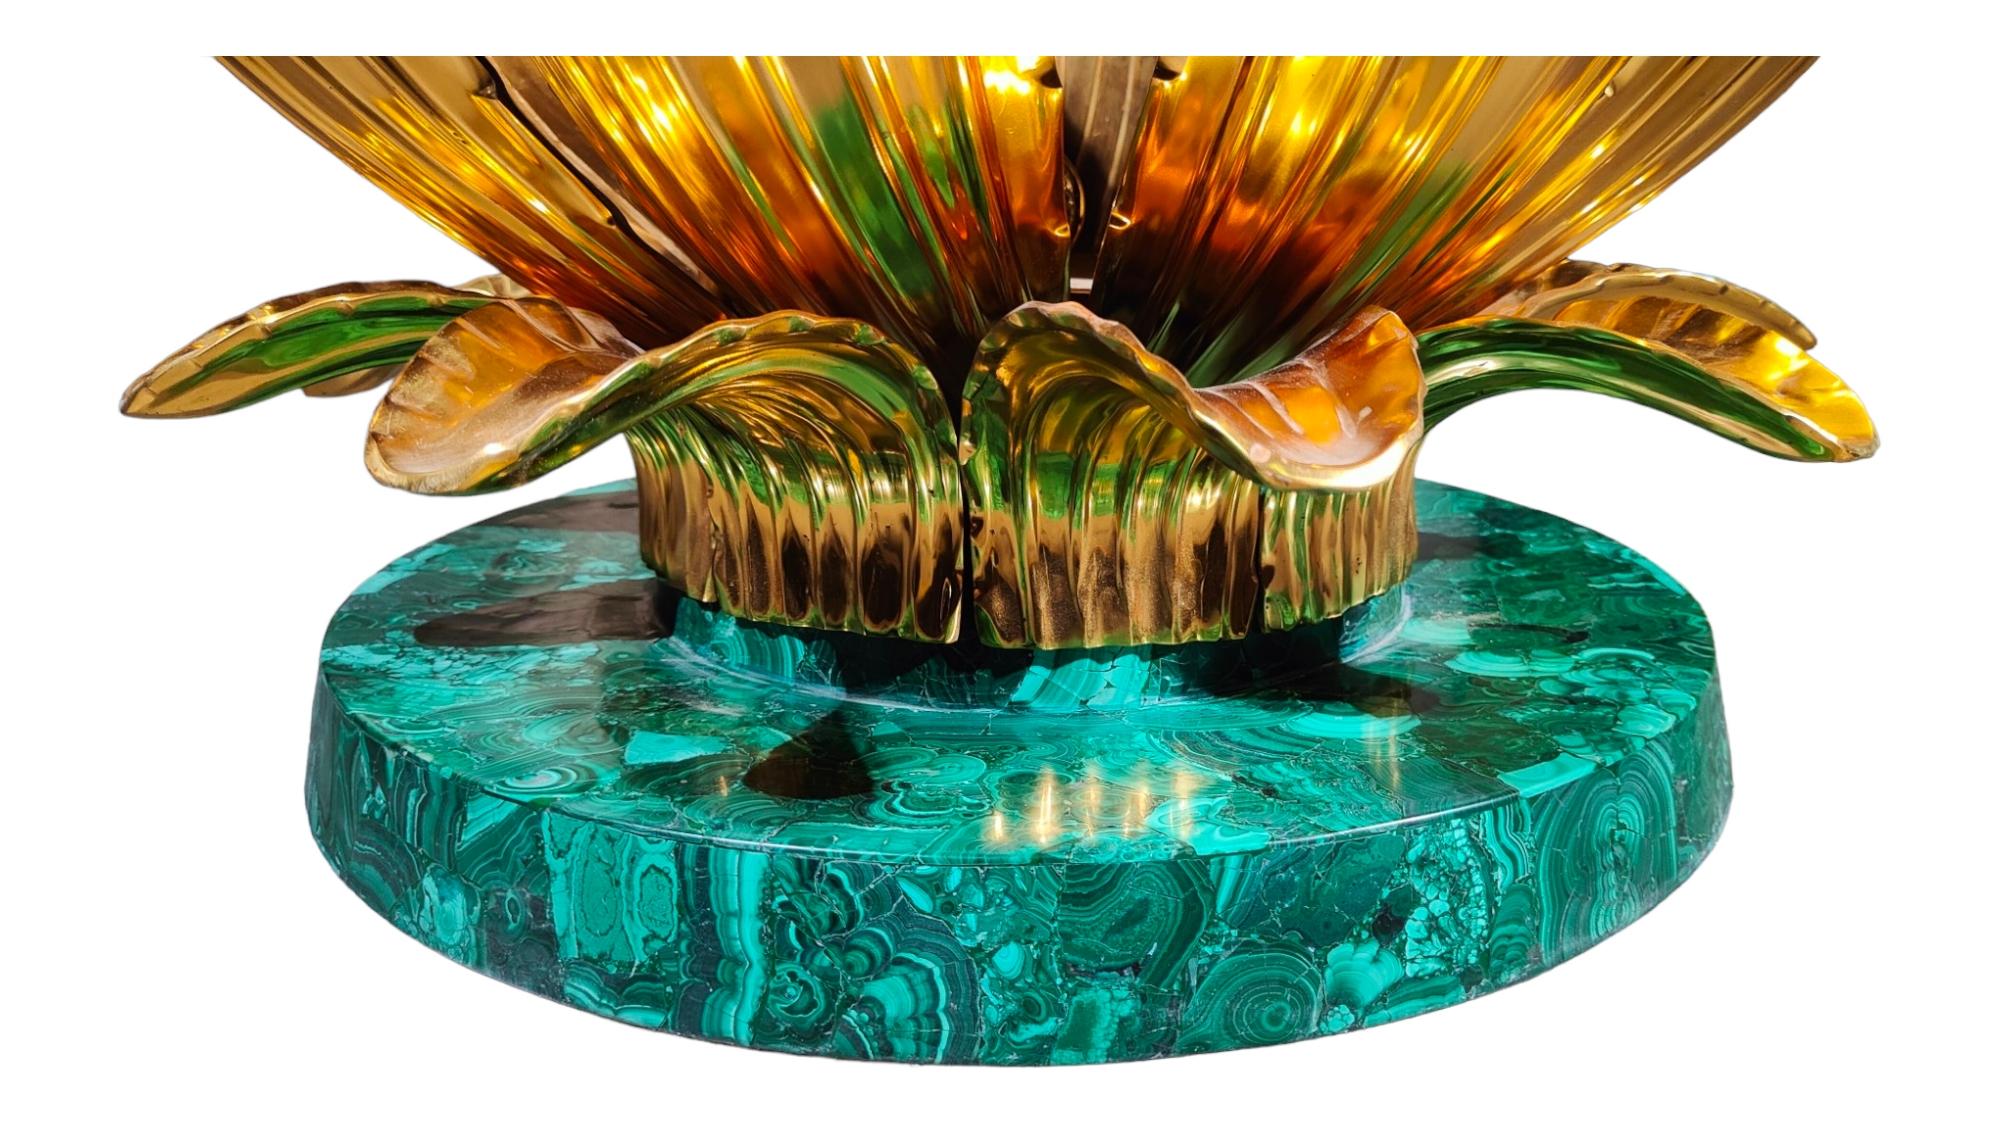 Monumental Cactus Table In Malachite Lalique Style For Sale 2